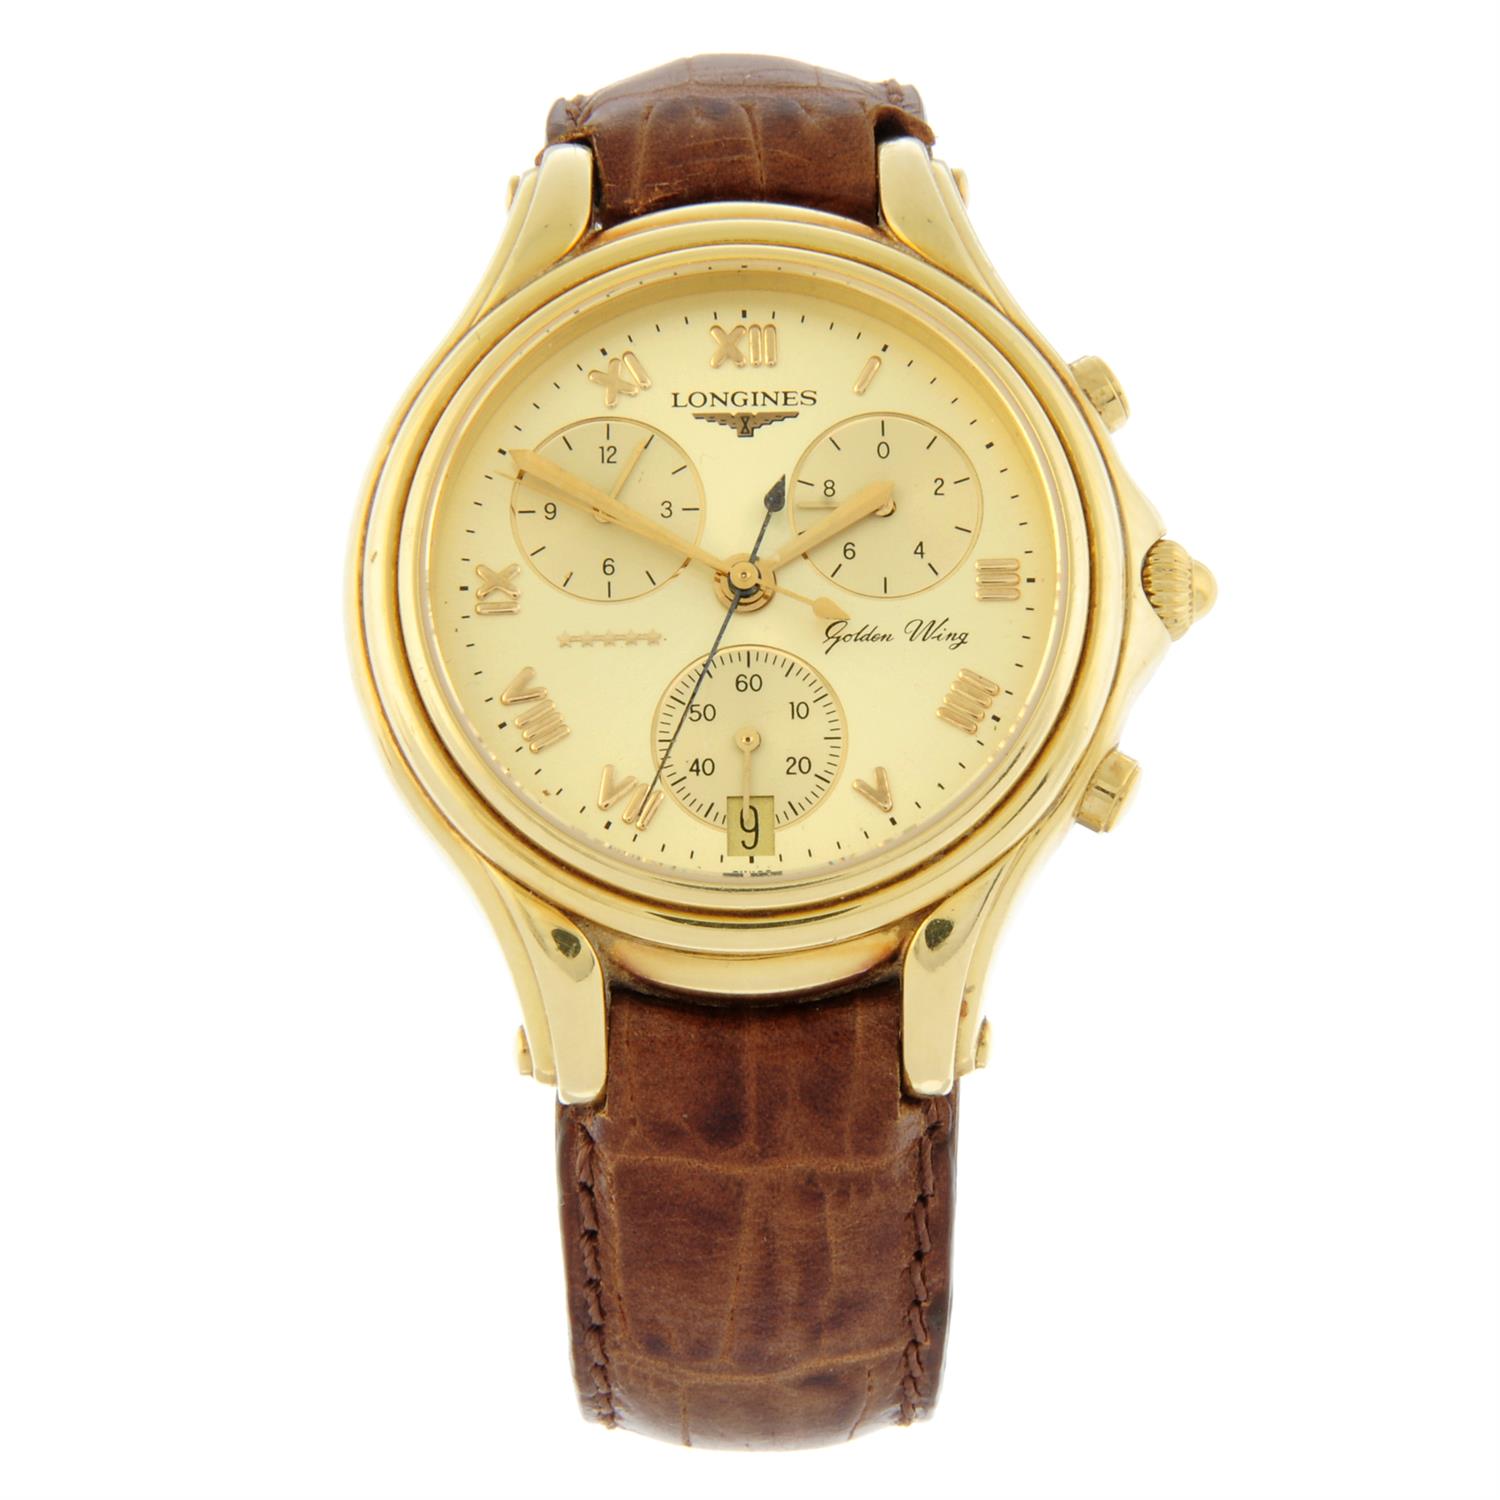 Longines - a Golden Wing chronograph watch, 38mm.